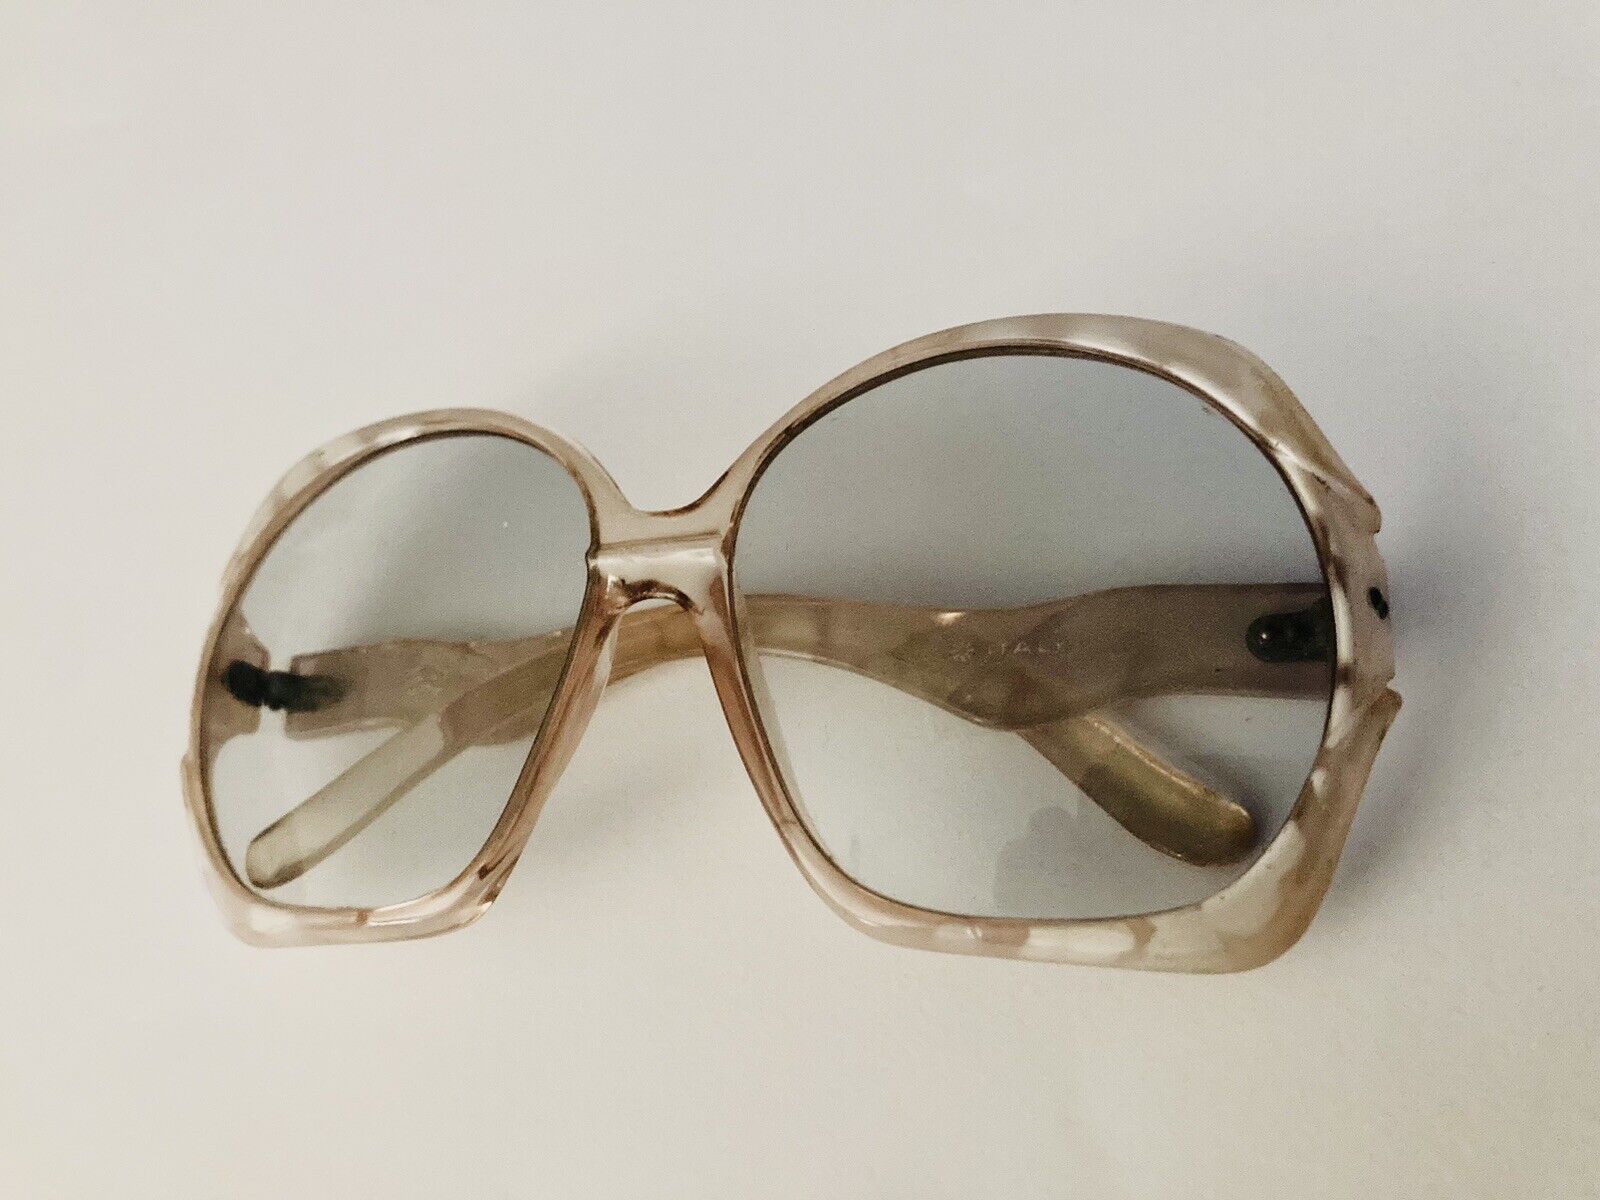 Vintage 1960’s-1970’s Made In Italy Oversized Square Eye Sun Glasses